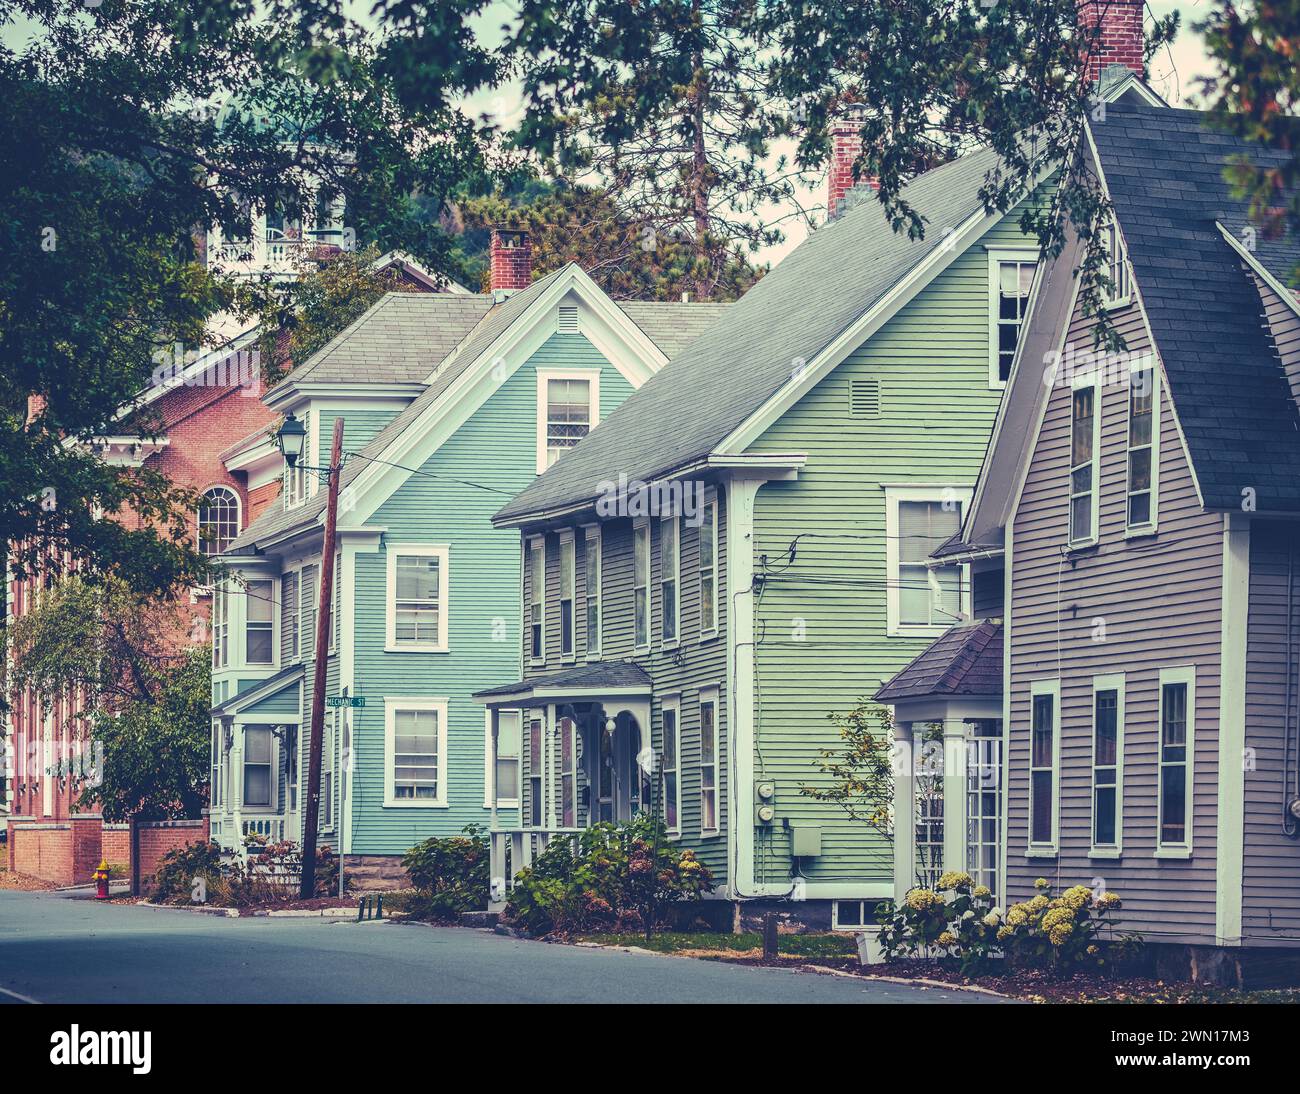 Retro Style Image Of Pretty Pastel Colored Houses In A Rural Town In Vermont In The Fall Stock Photo